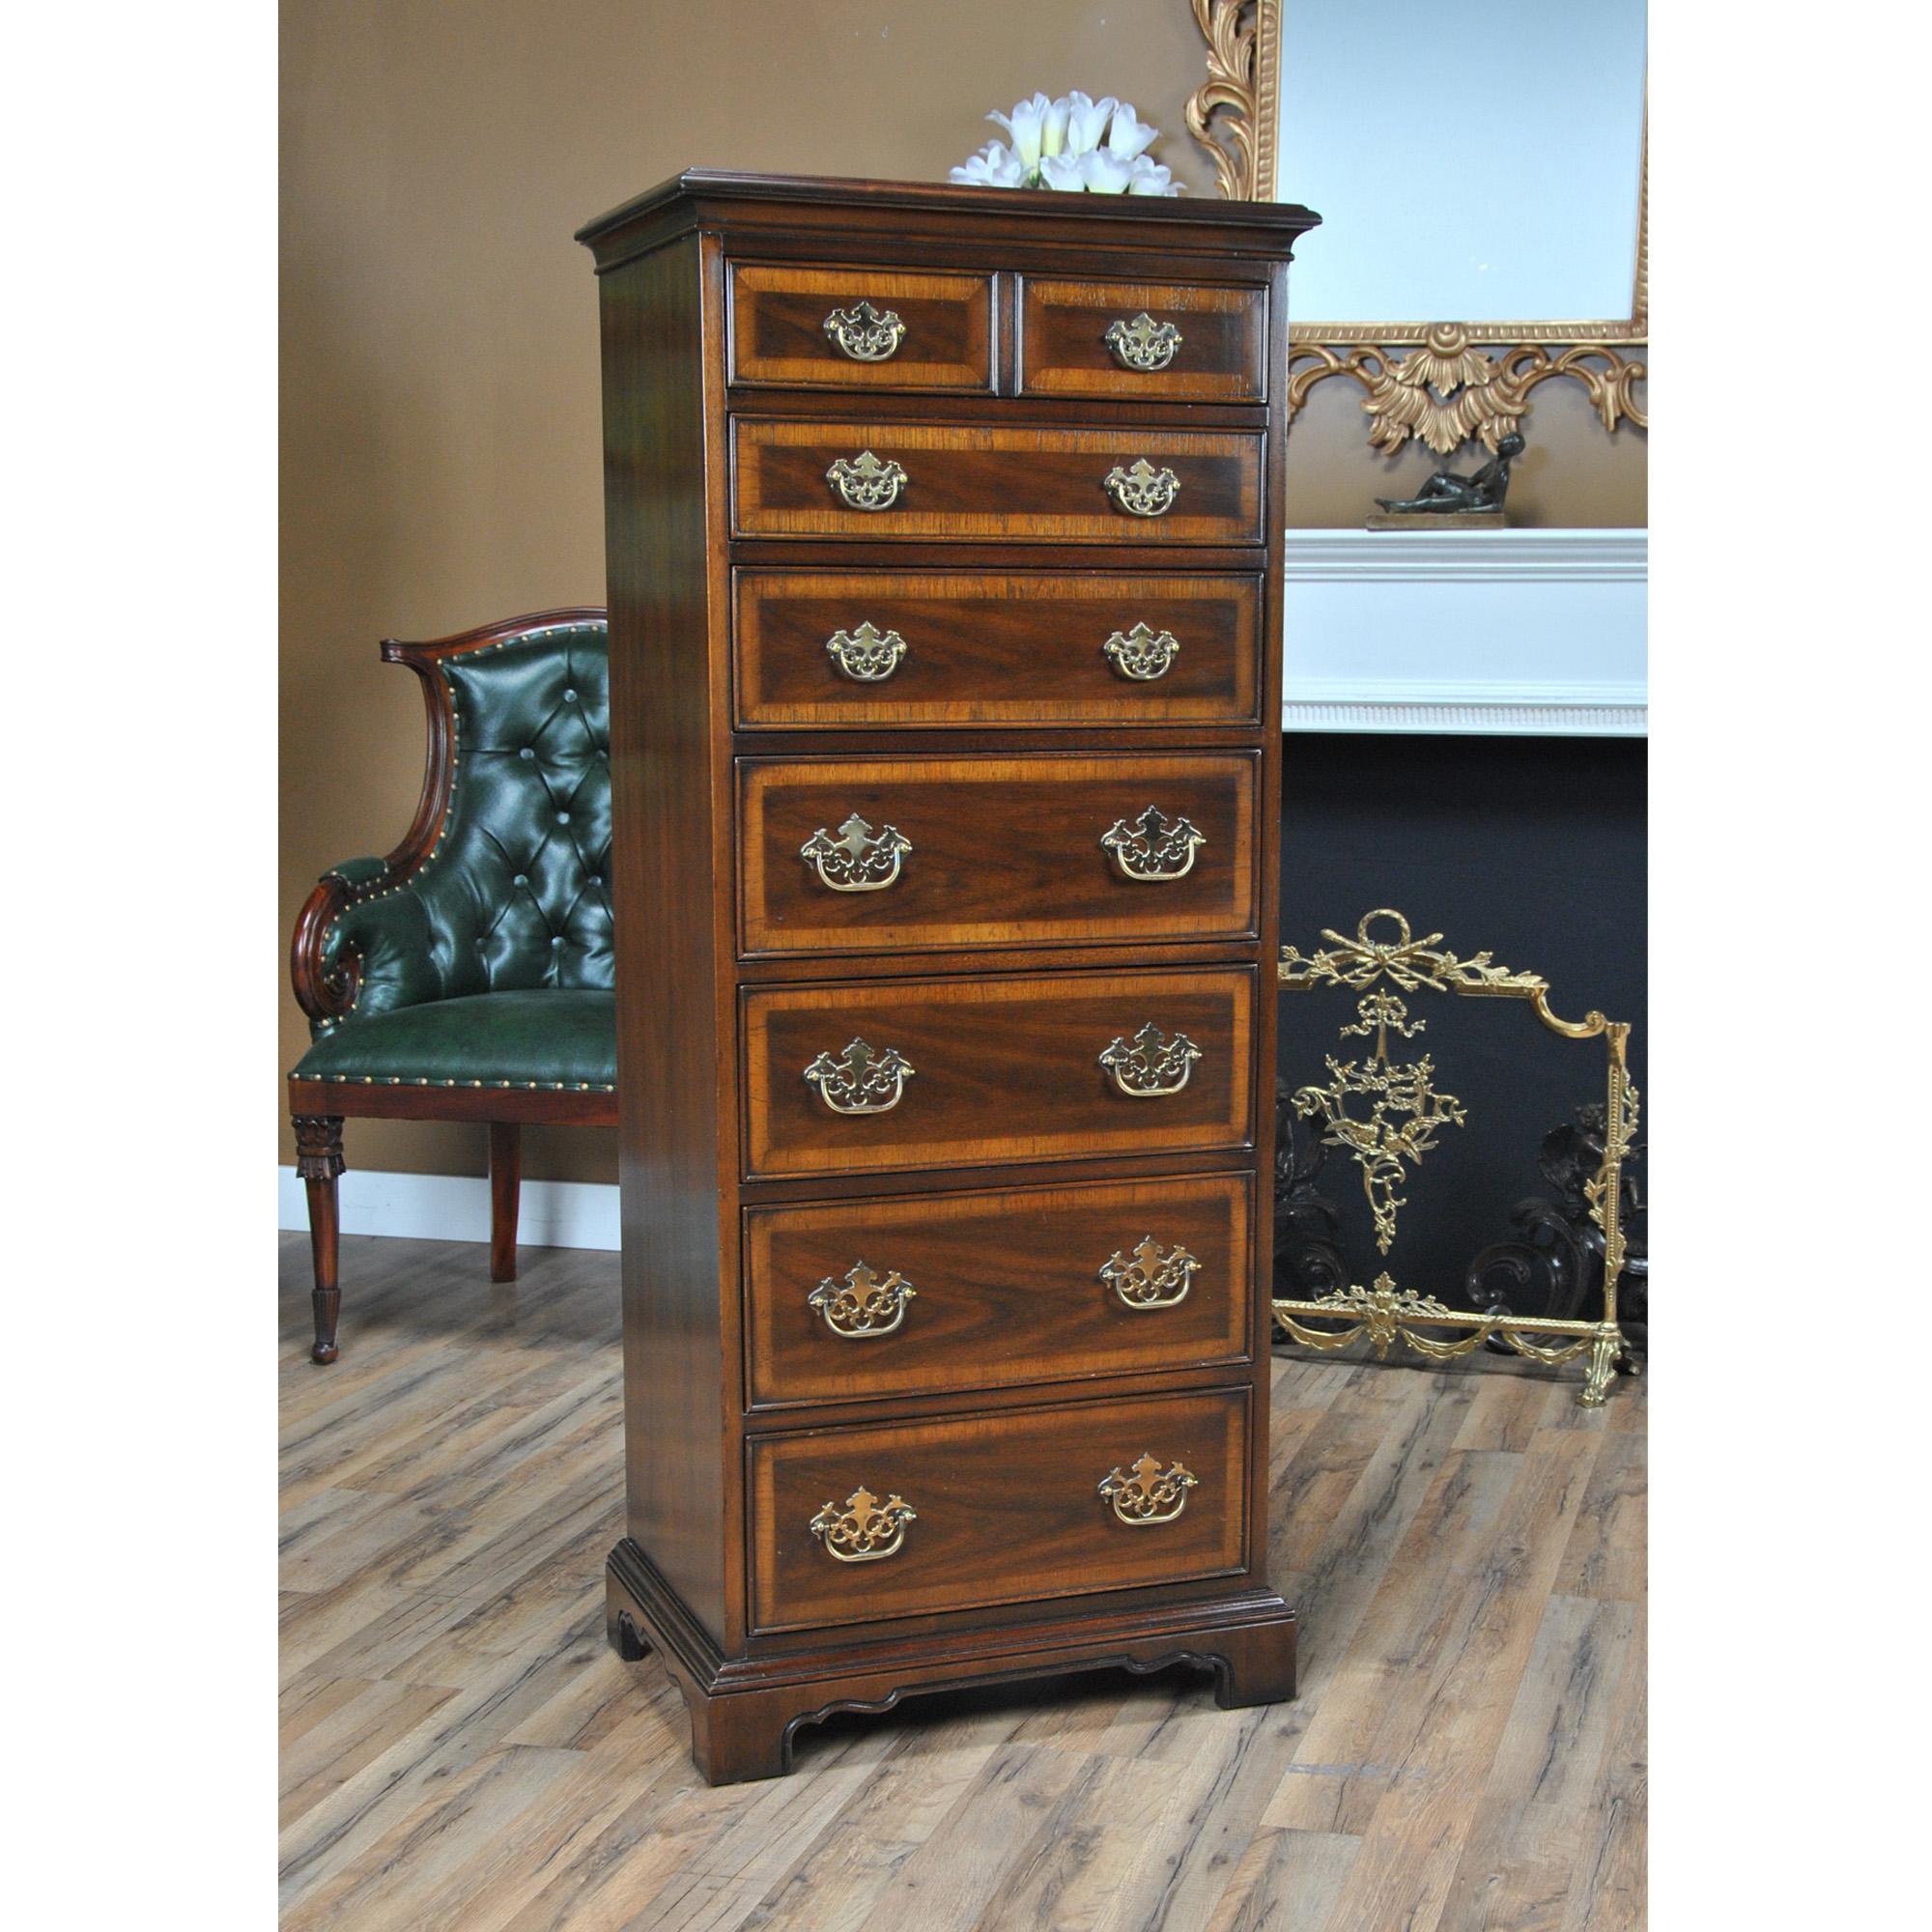 A Vintage Drexel Lingerie Chest, a high quality piece of furniture from top to bottom. This tall chest was designed to store lingerie but it can hold any variety of items, all in a narrow space. Hard to find vertical storage, with a jewelry tray in